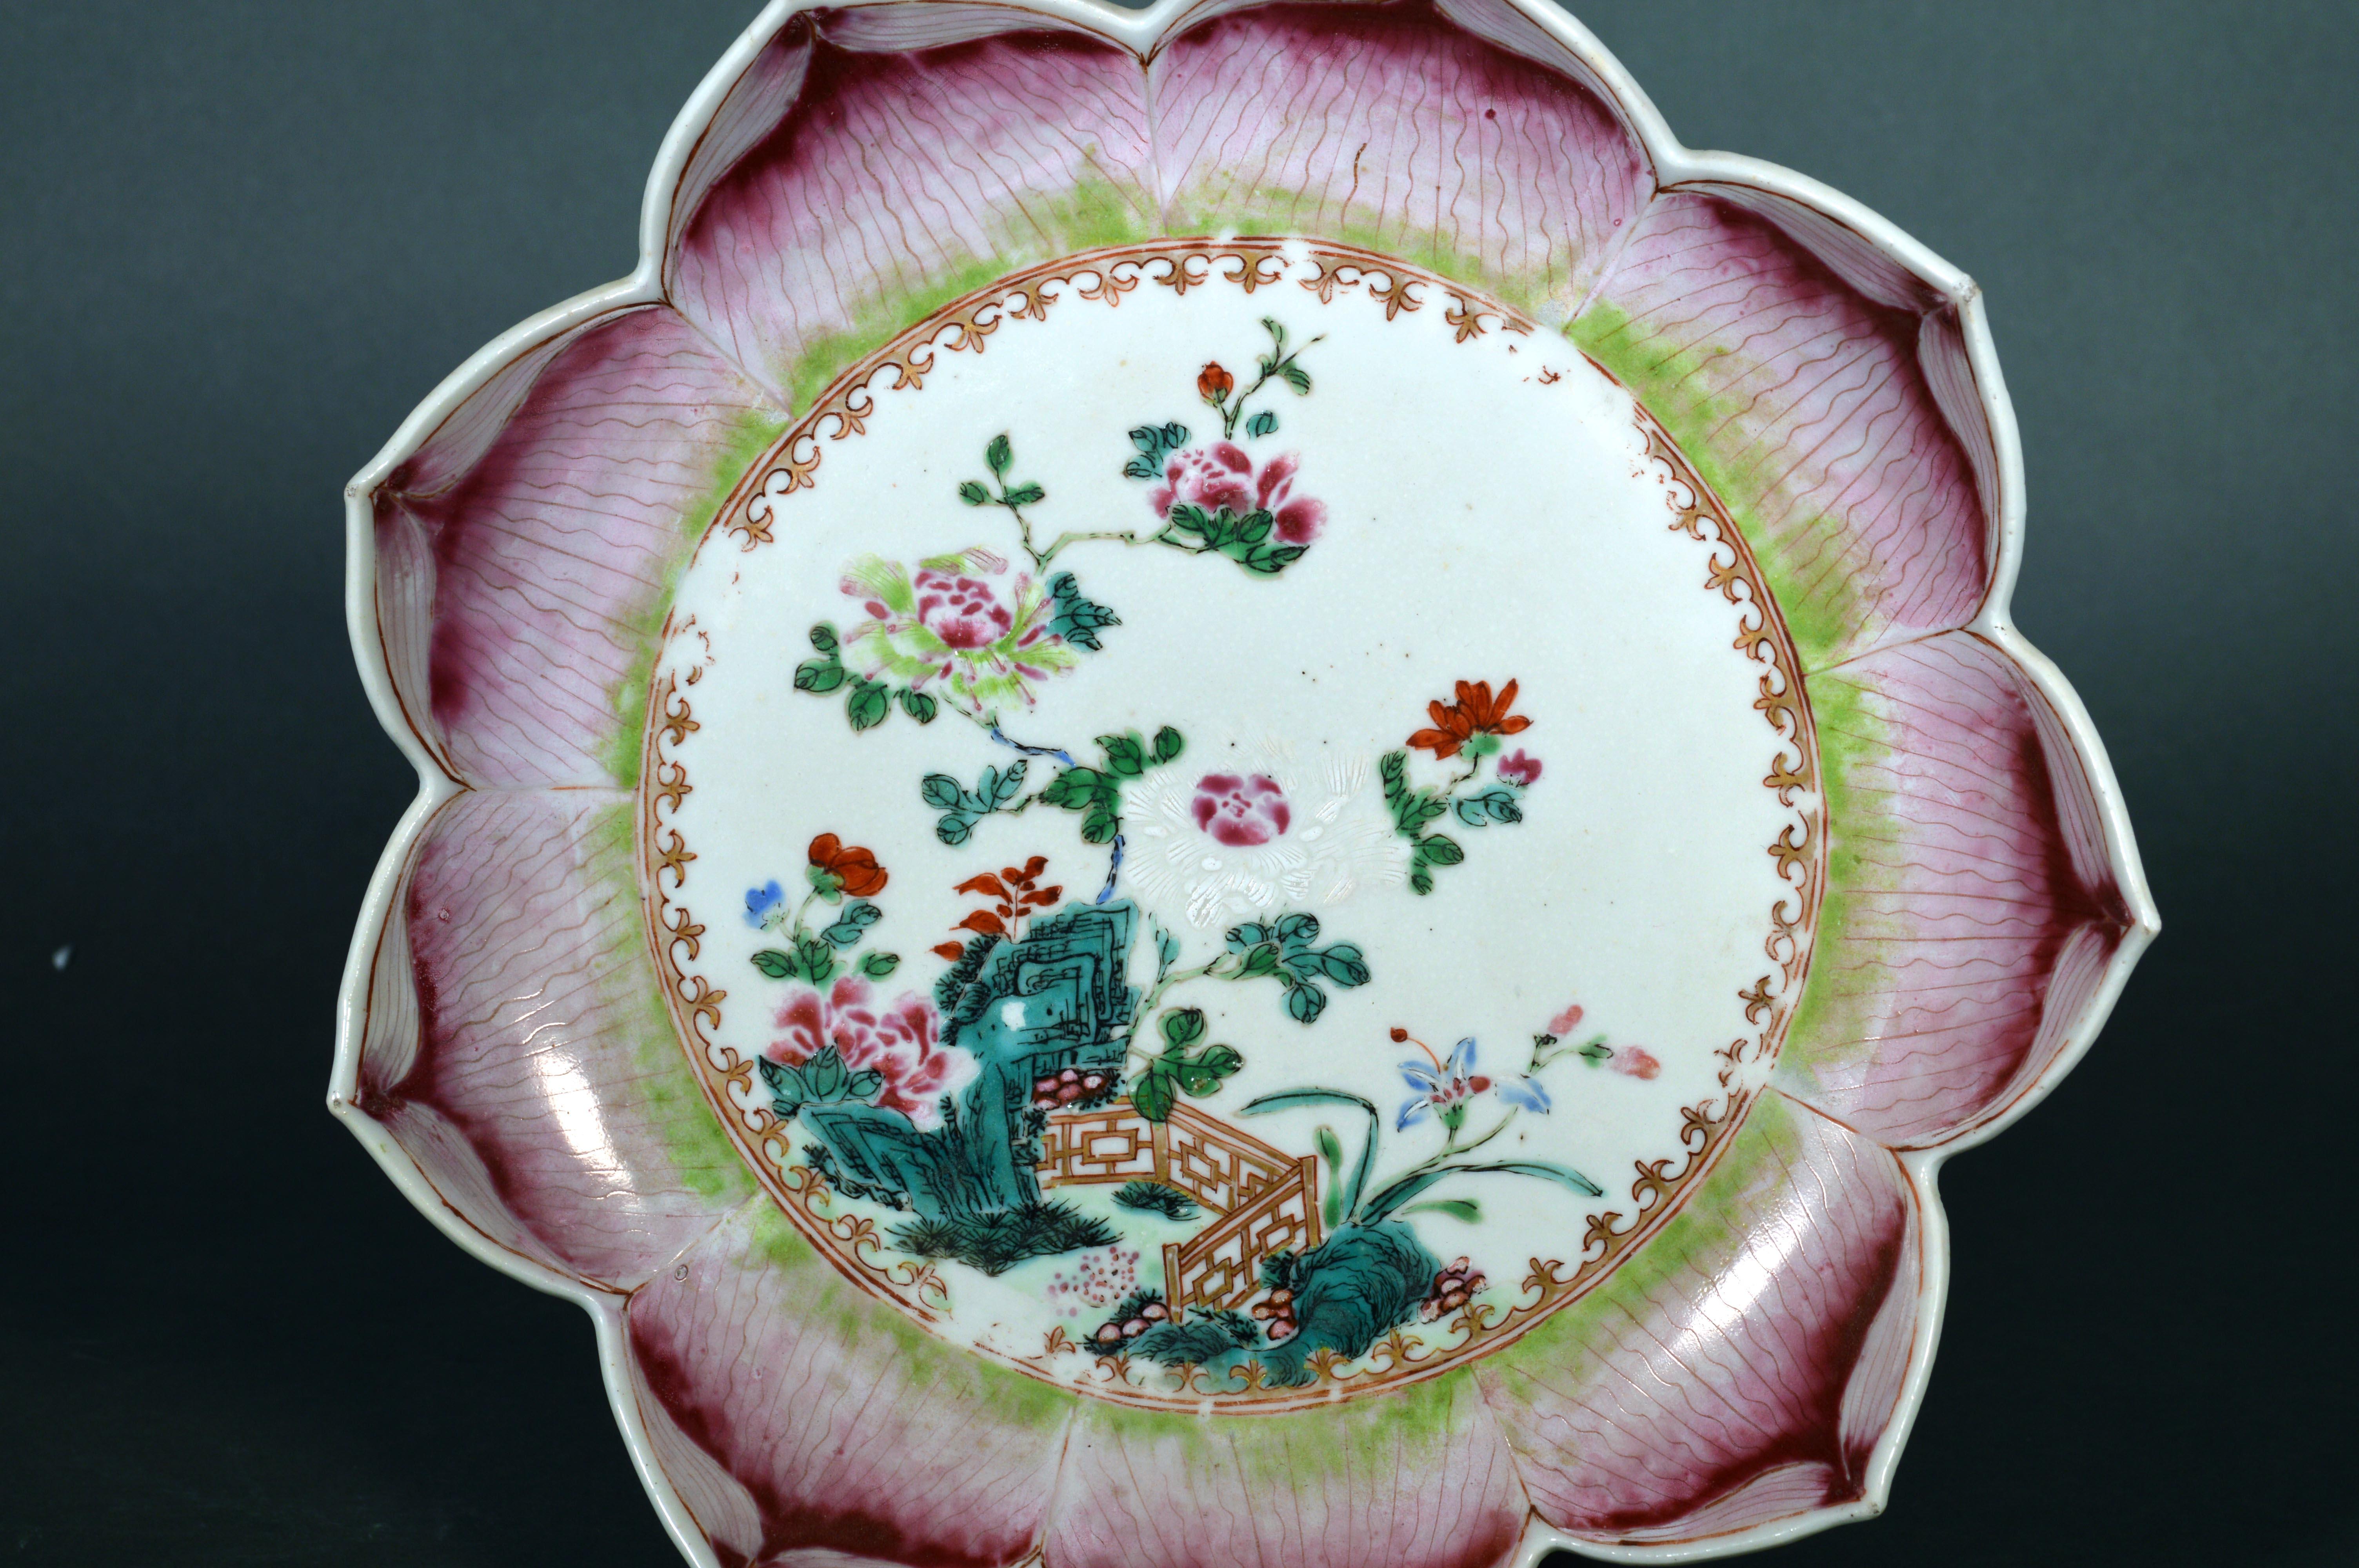 18th-century Chinese Export Porcelain Lotus Leaf Shaped Dishes 1